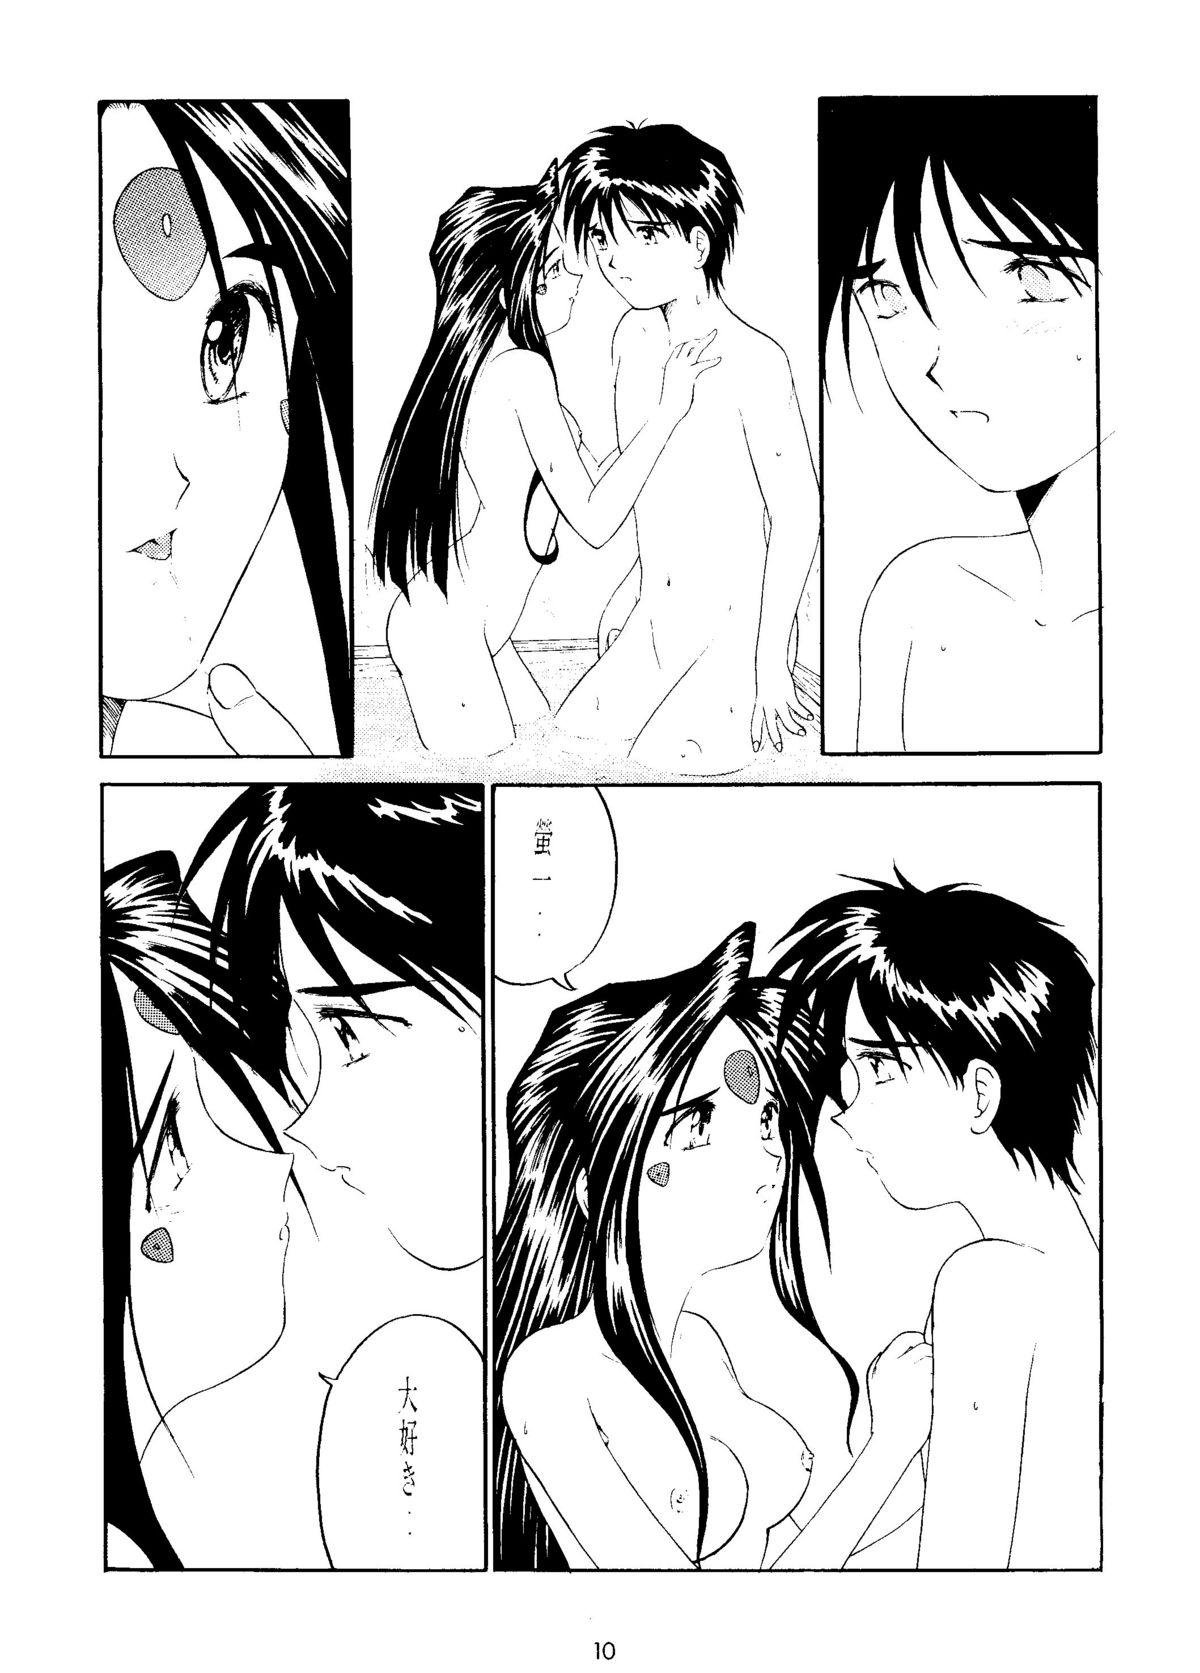 Girlfriends Style - Ah my goddess Exhibitionist - Page 9